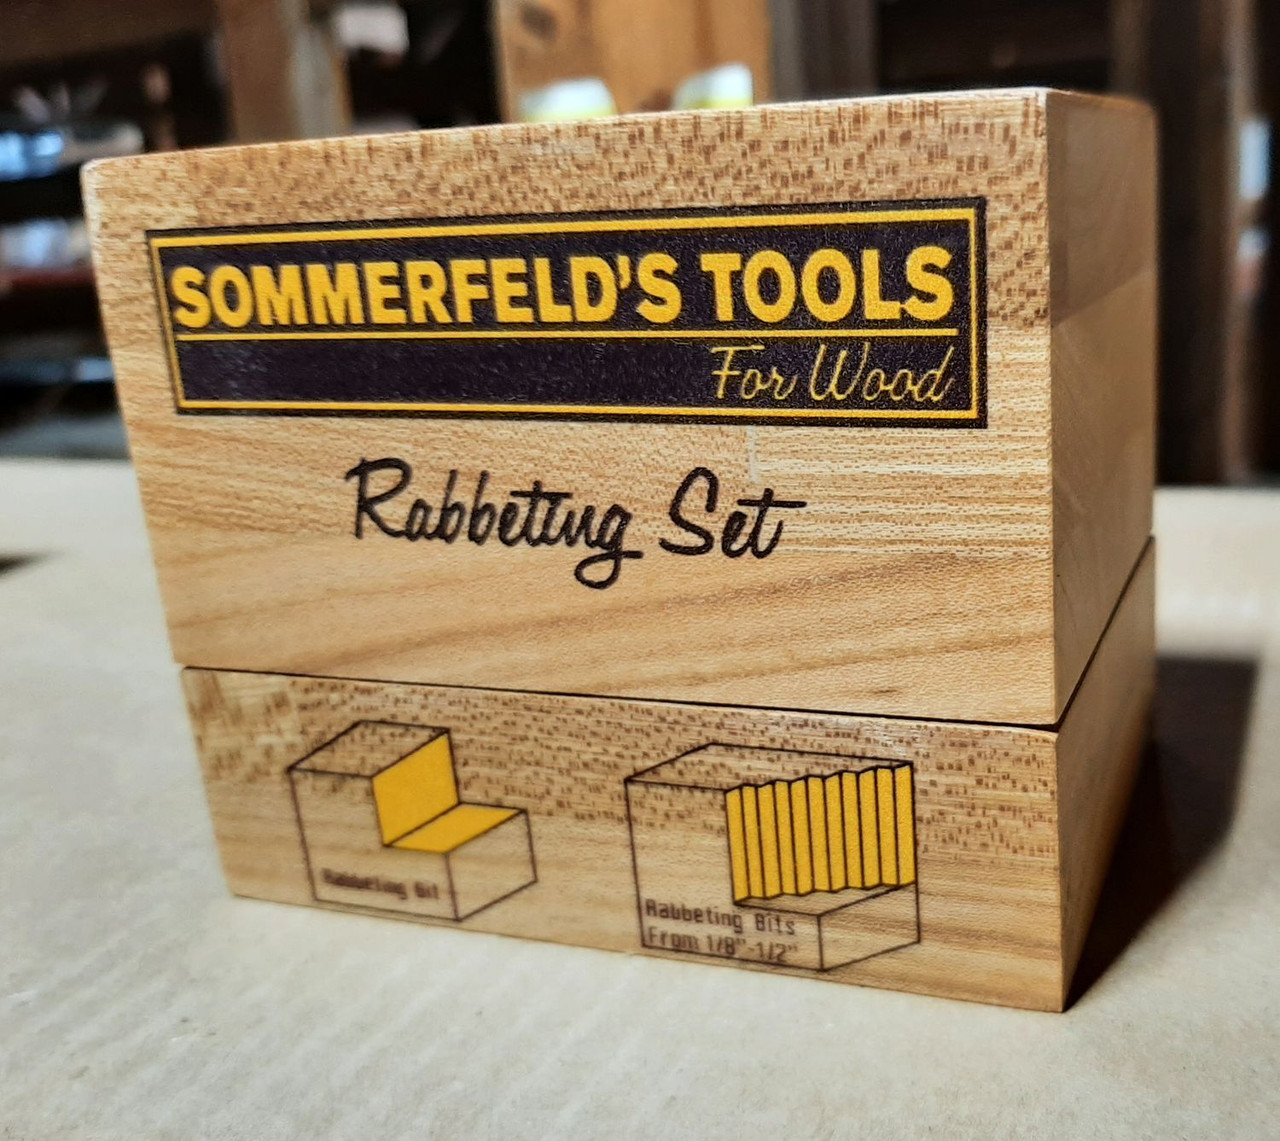 Sommerfeld tools 01013 Seven Piece Adjustable Depth Rabbiting Set for woodworking on your router table